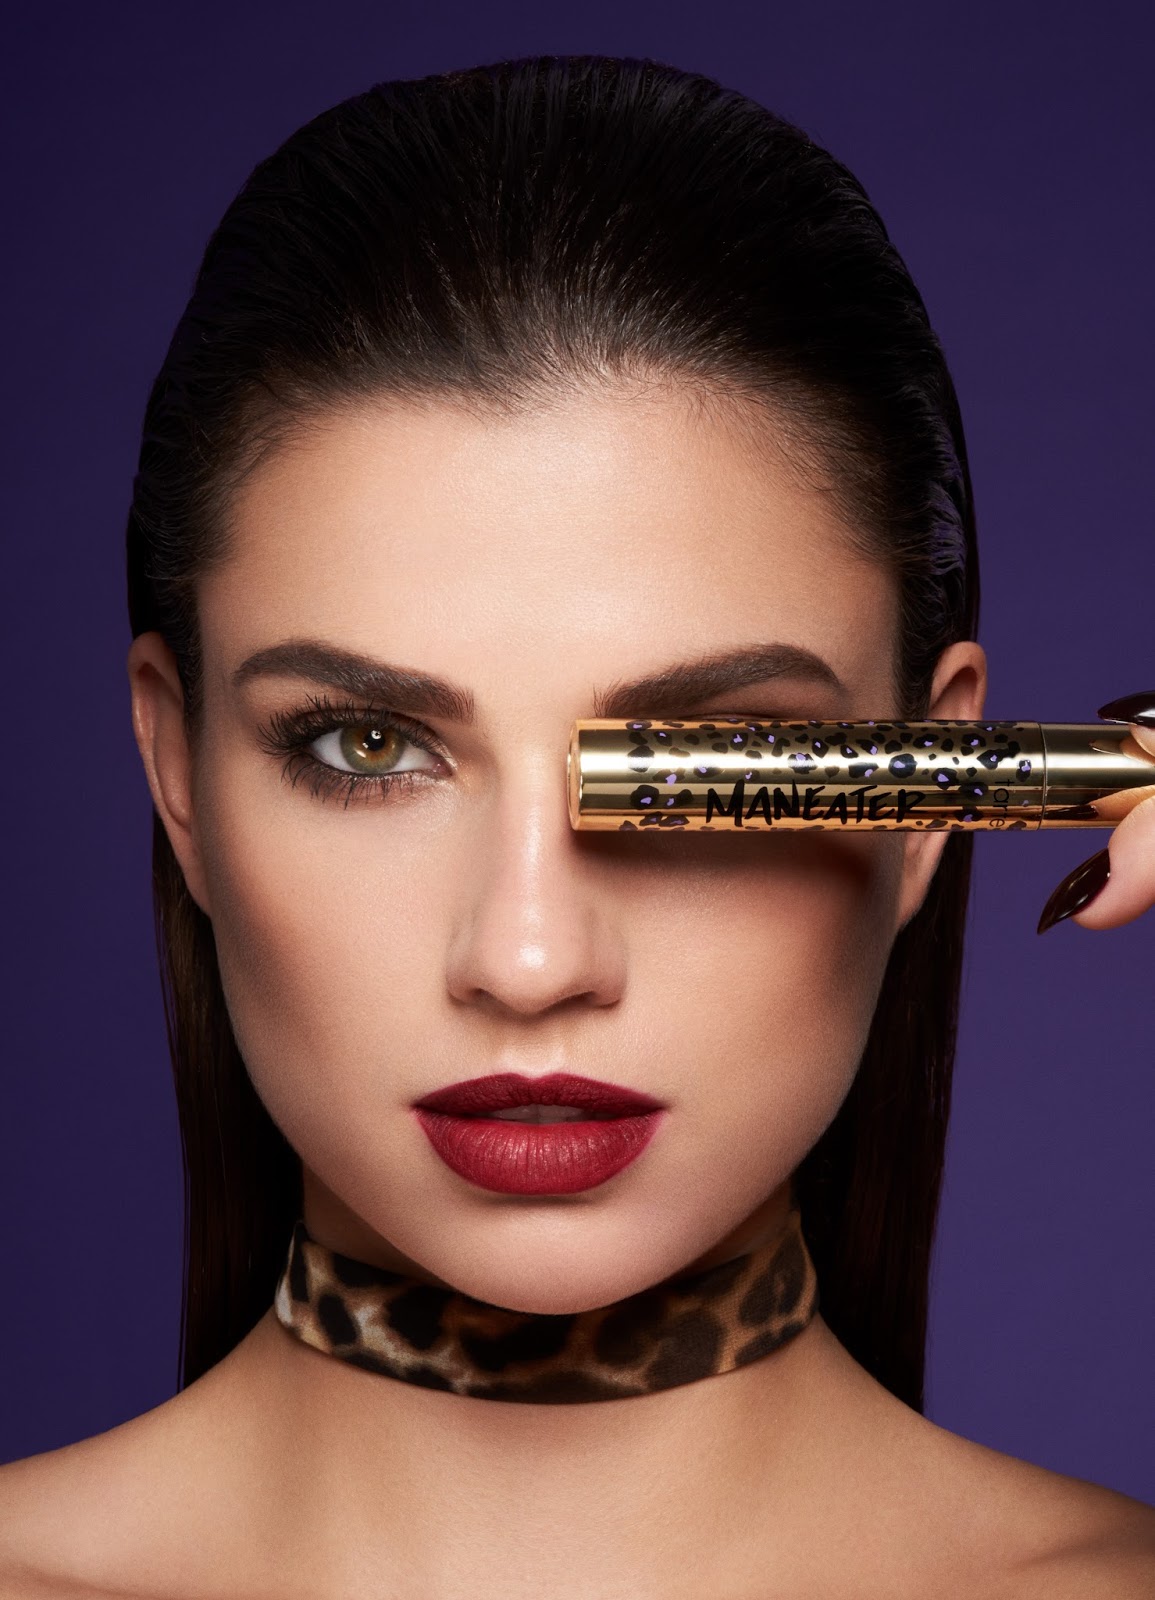 Tarte Cosmetics Maneater Mascara Makeup Beauty Advertising Campaign with mo...